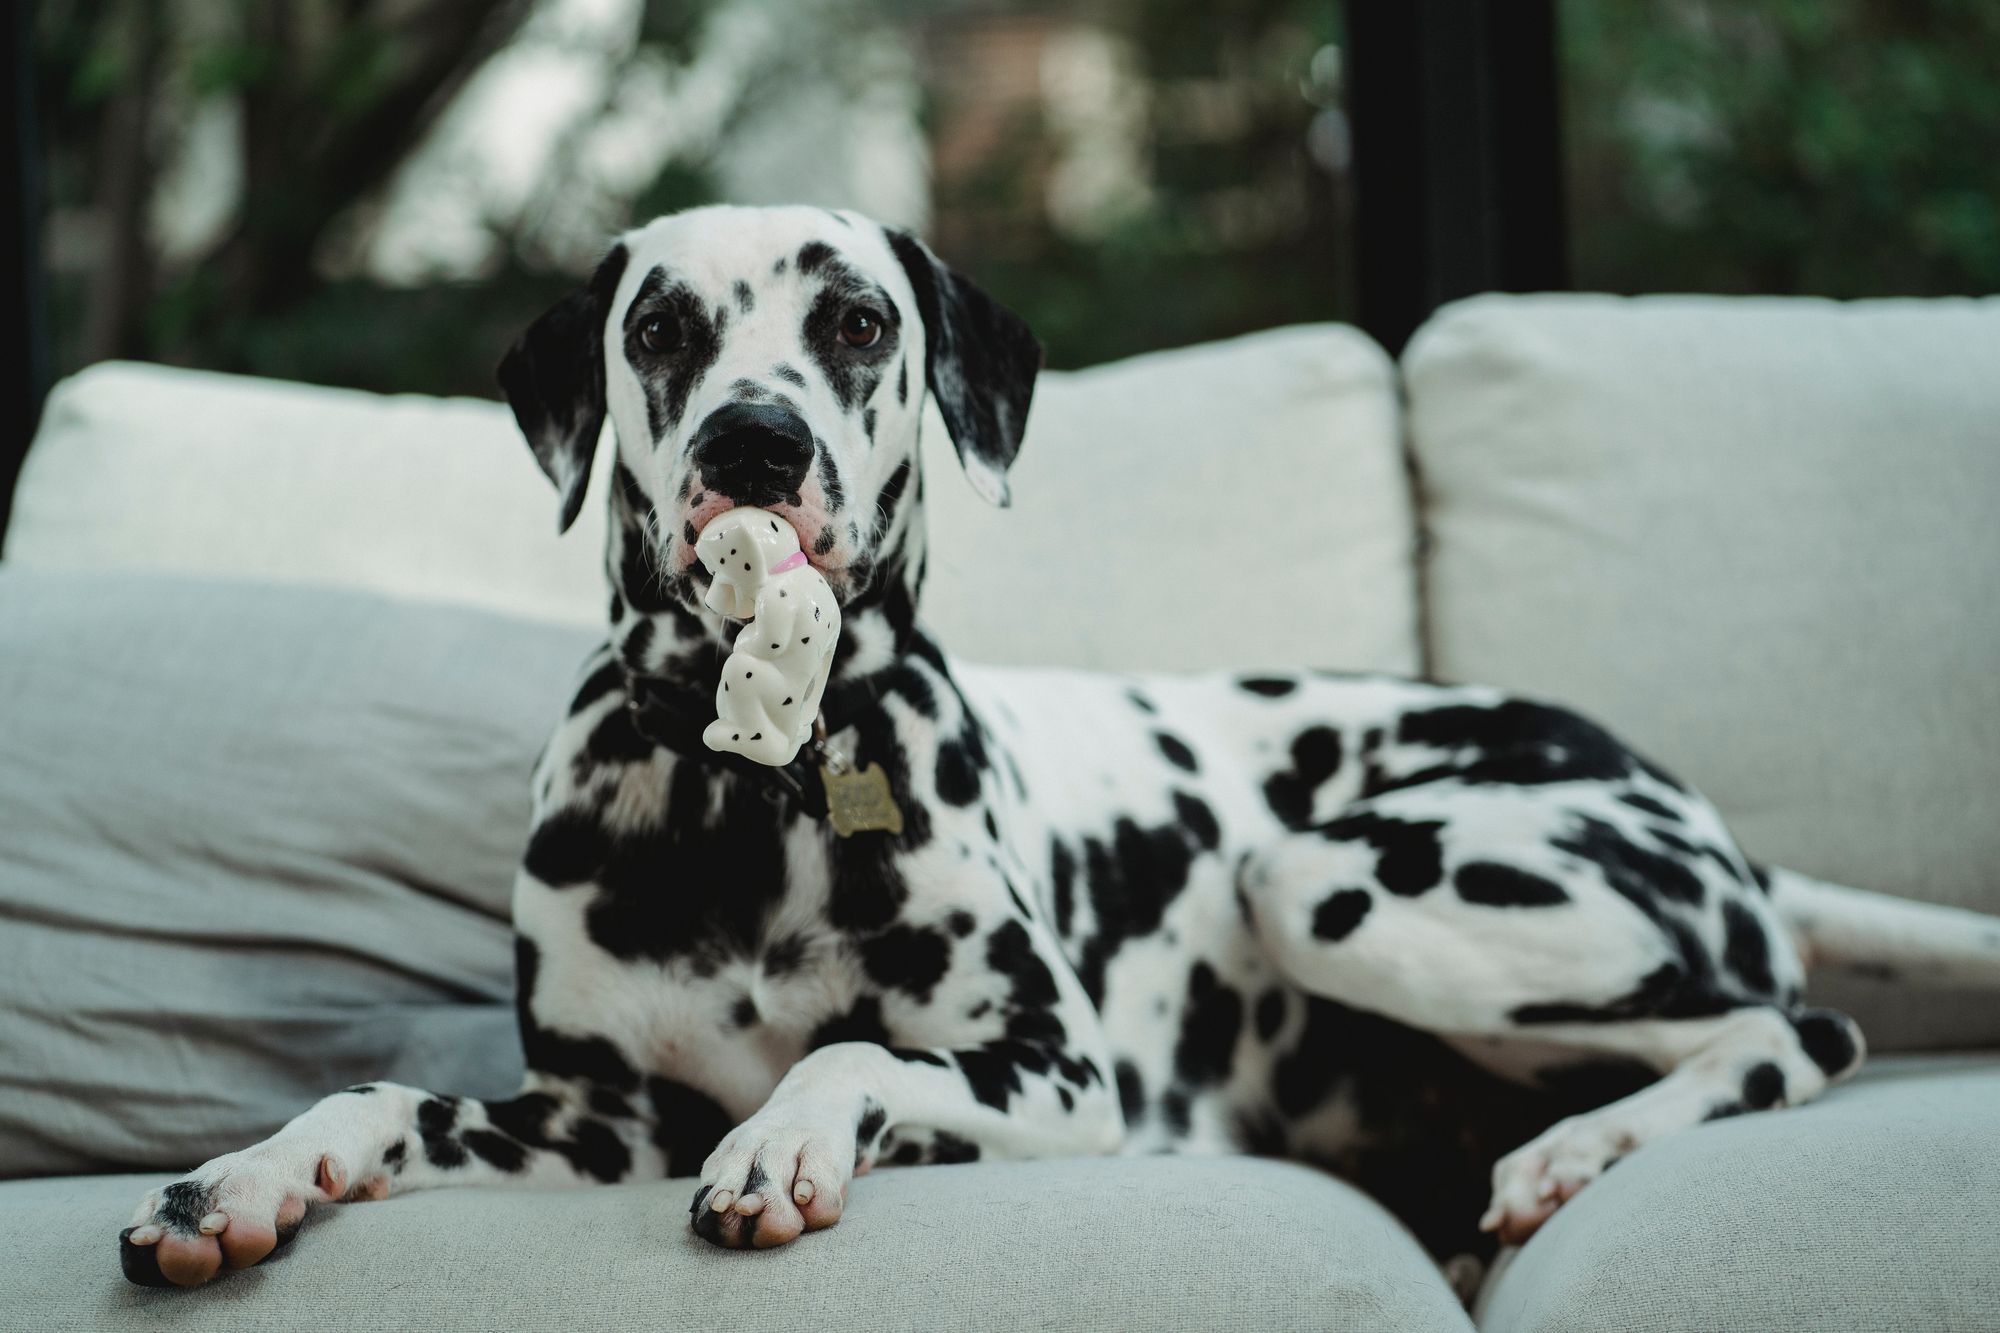 Dalmatian with a toy in its mouth standing on a couch